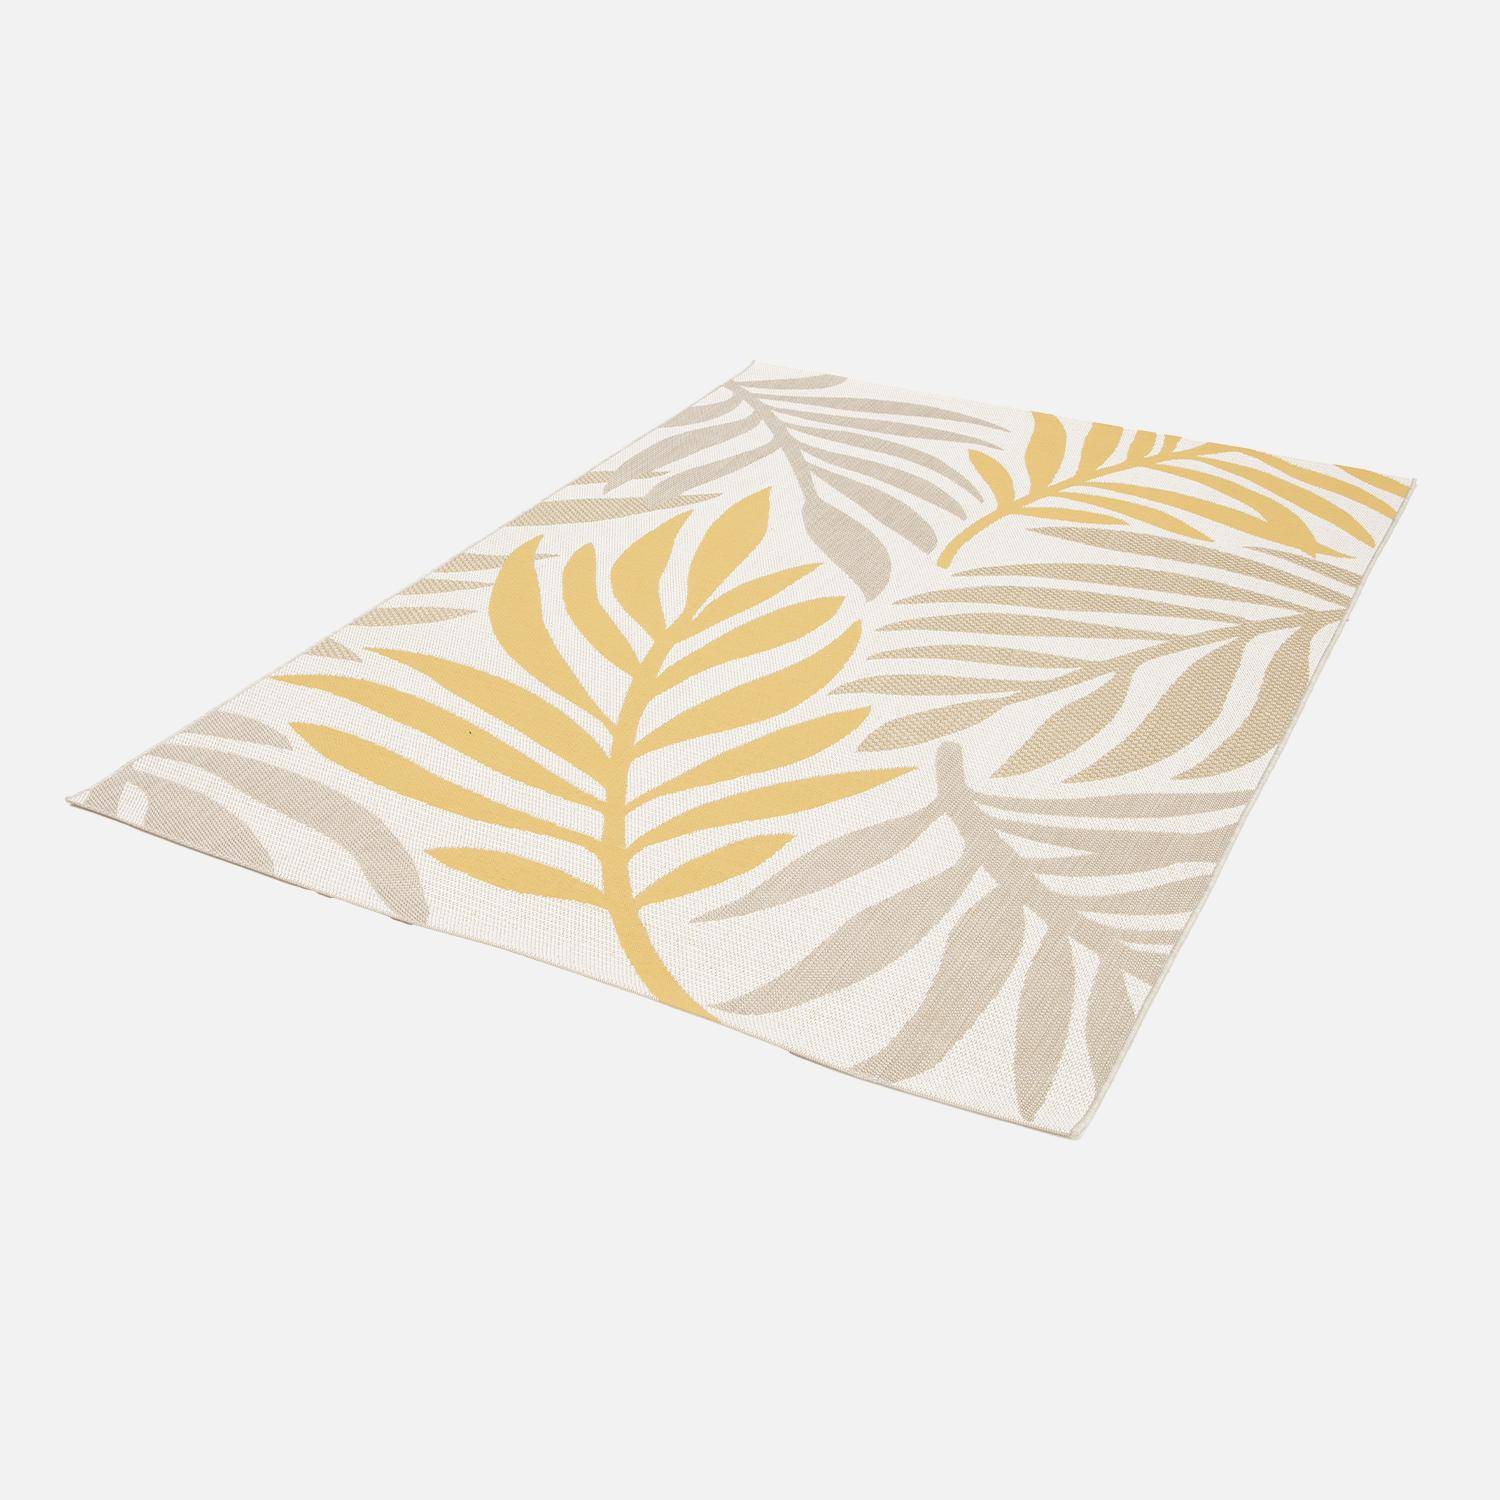 Indoor/outdoor carpet with beige and mustard plant pattern, recycled polyester, Bloom, 120 x 170 cm Photo4